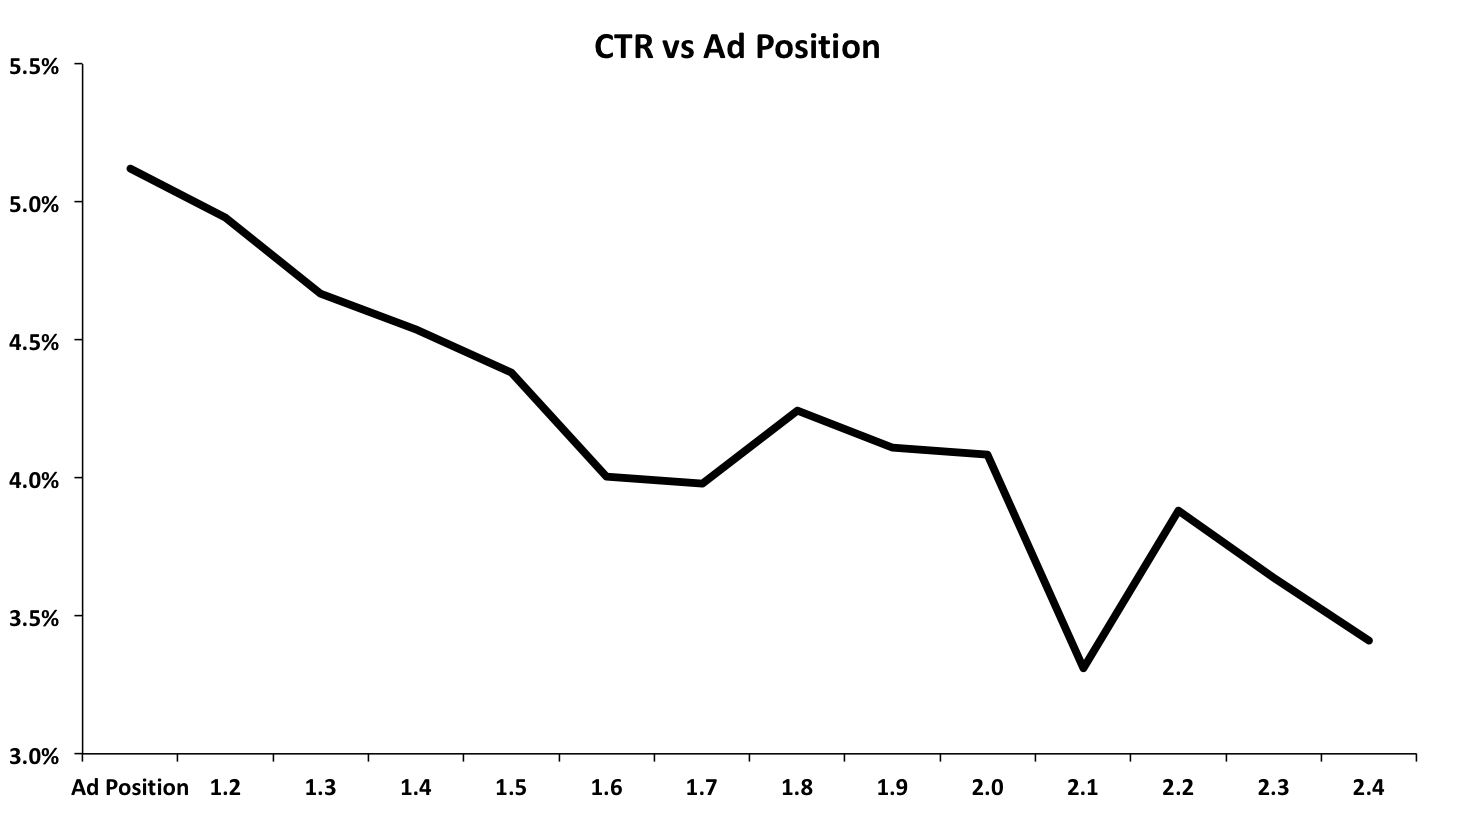 The example above shows the same exact match keyword’s click-through rate at different ad positions. In this case, moving from ad position 2.4 to 1.1 increases CTR by 50%.